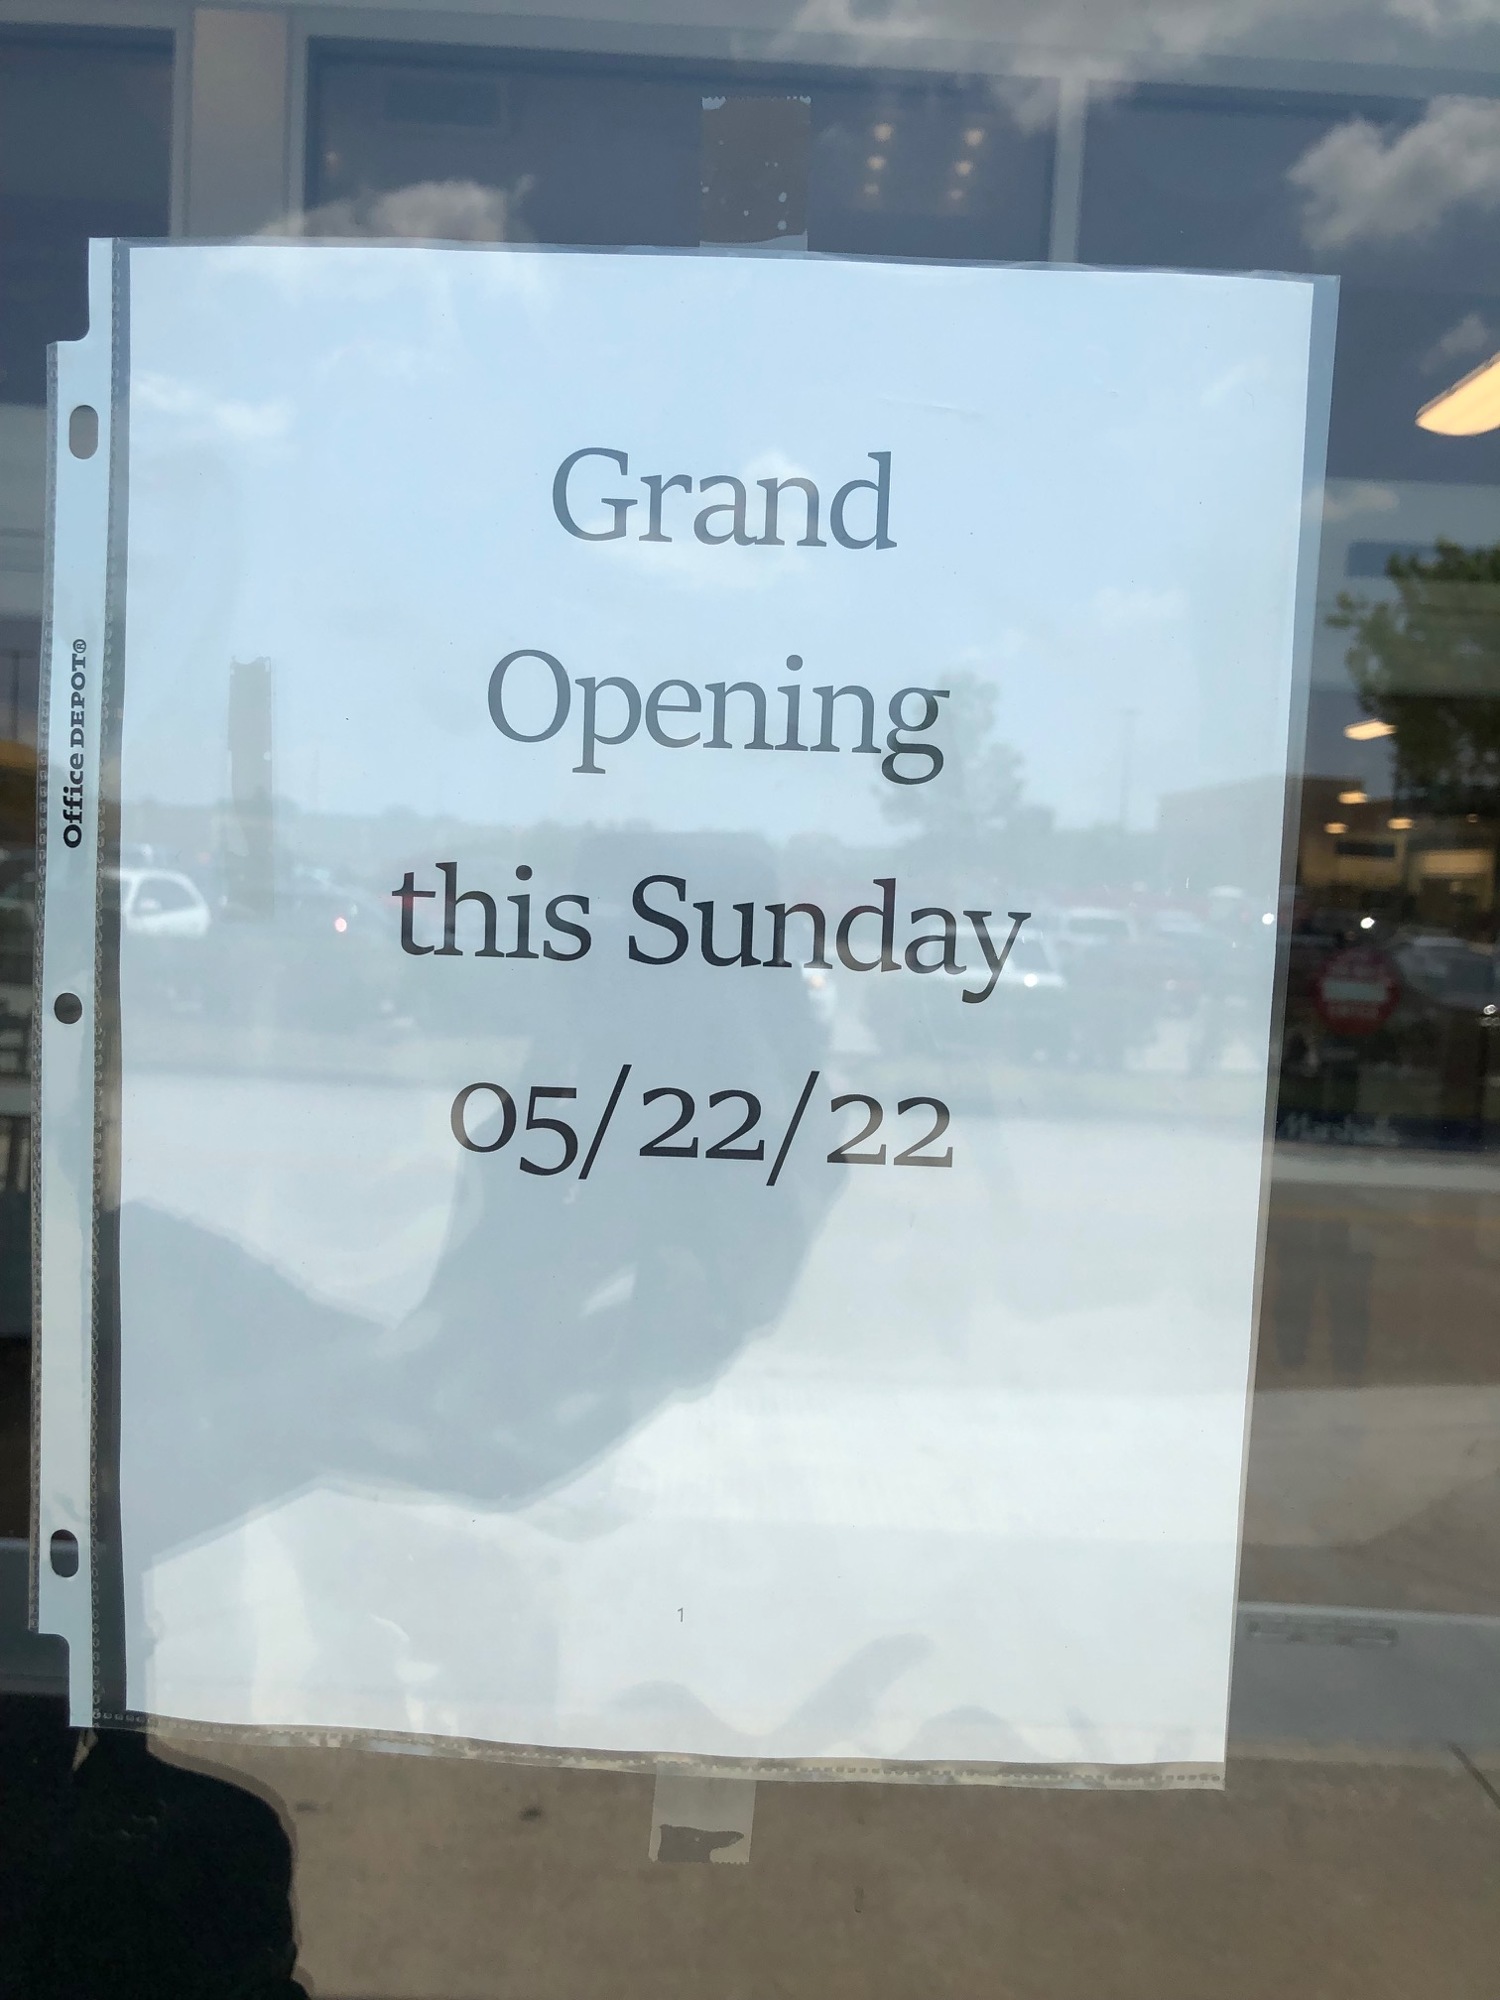 Grand opening hours are 8 a.m. to 10 p.m. May 22.